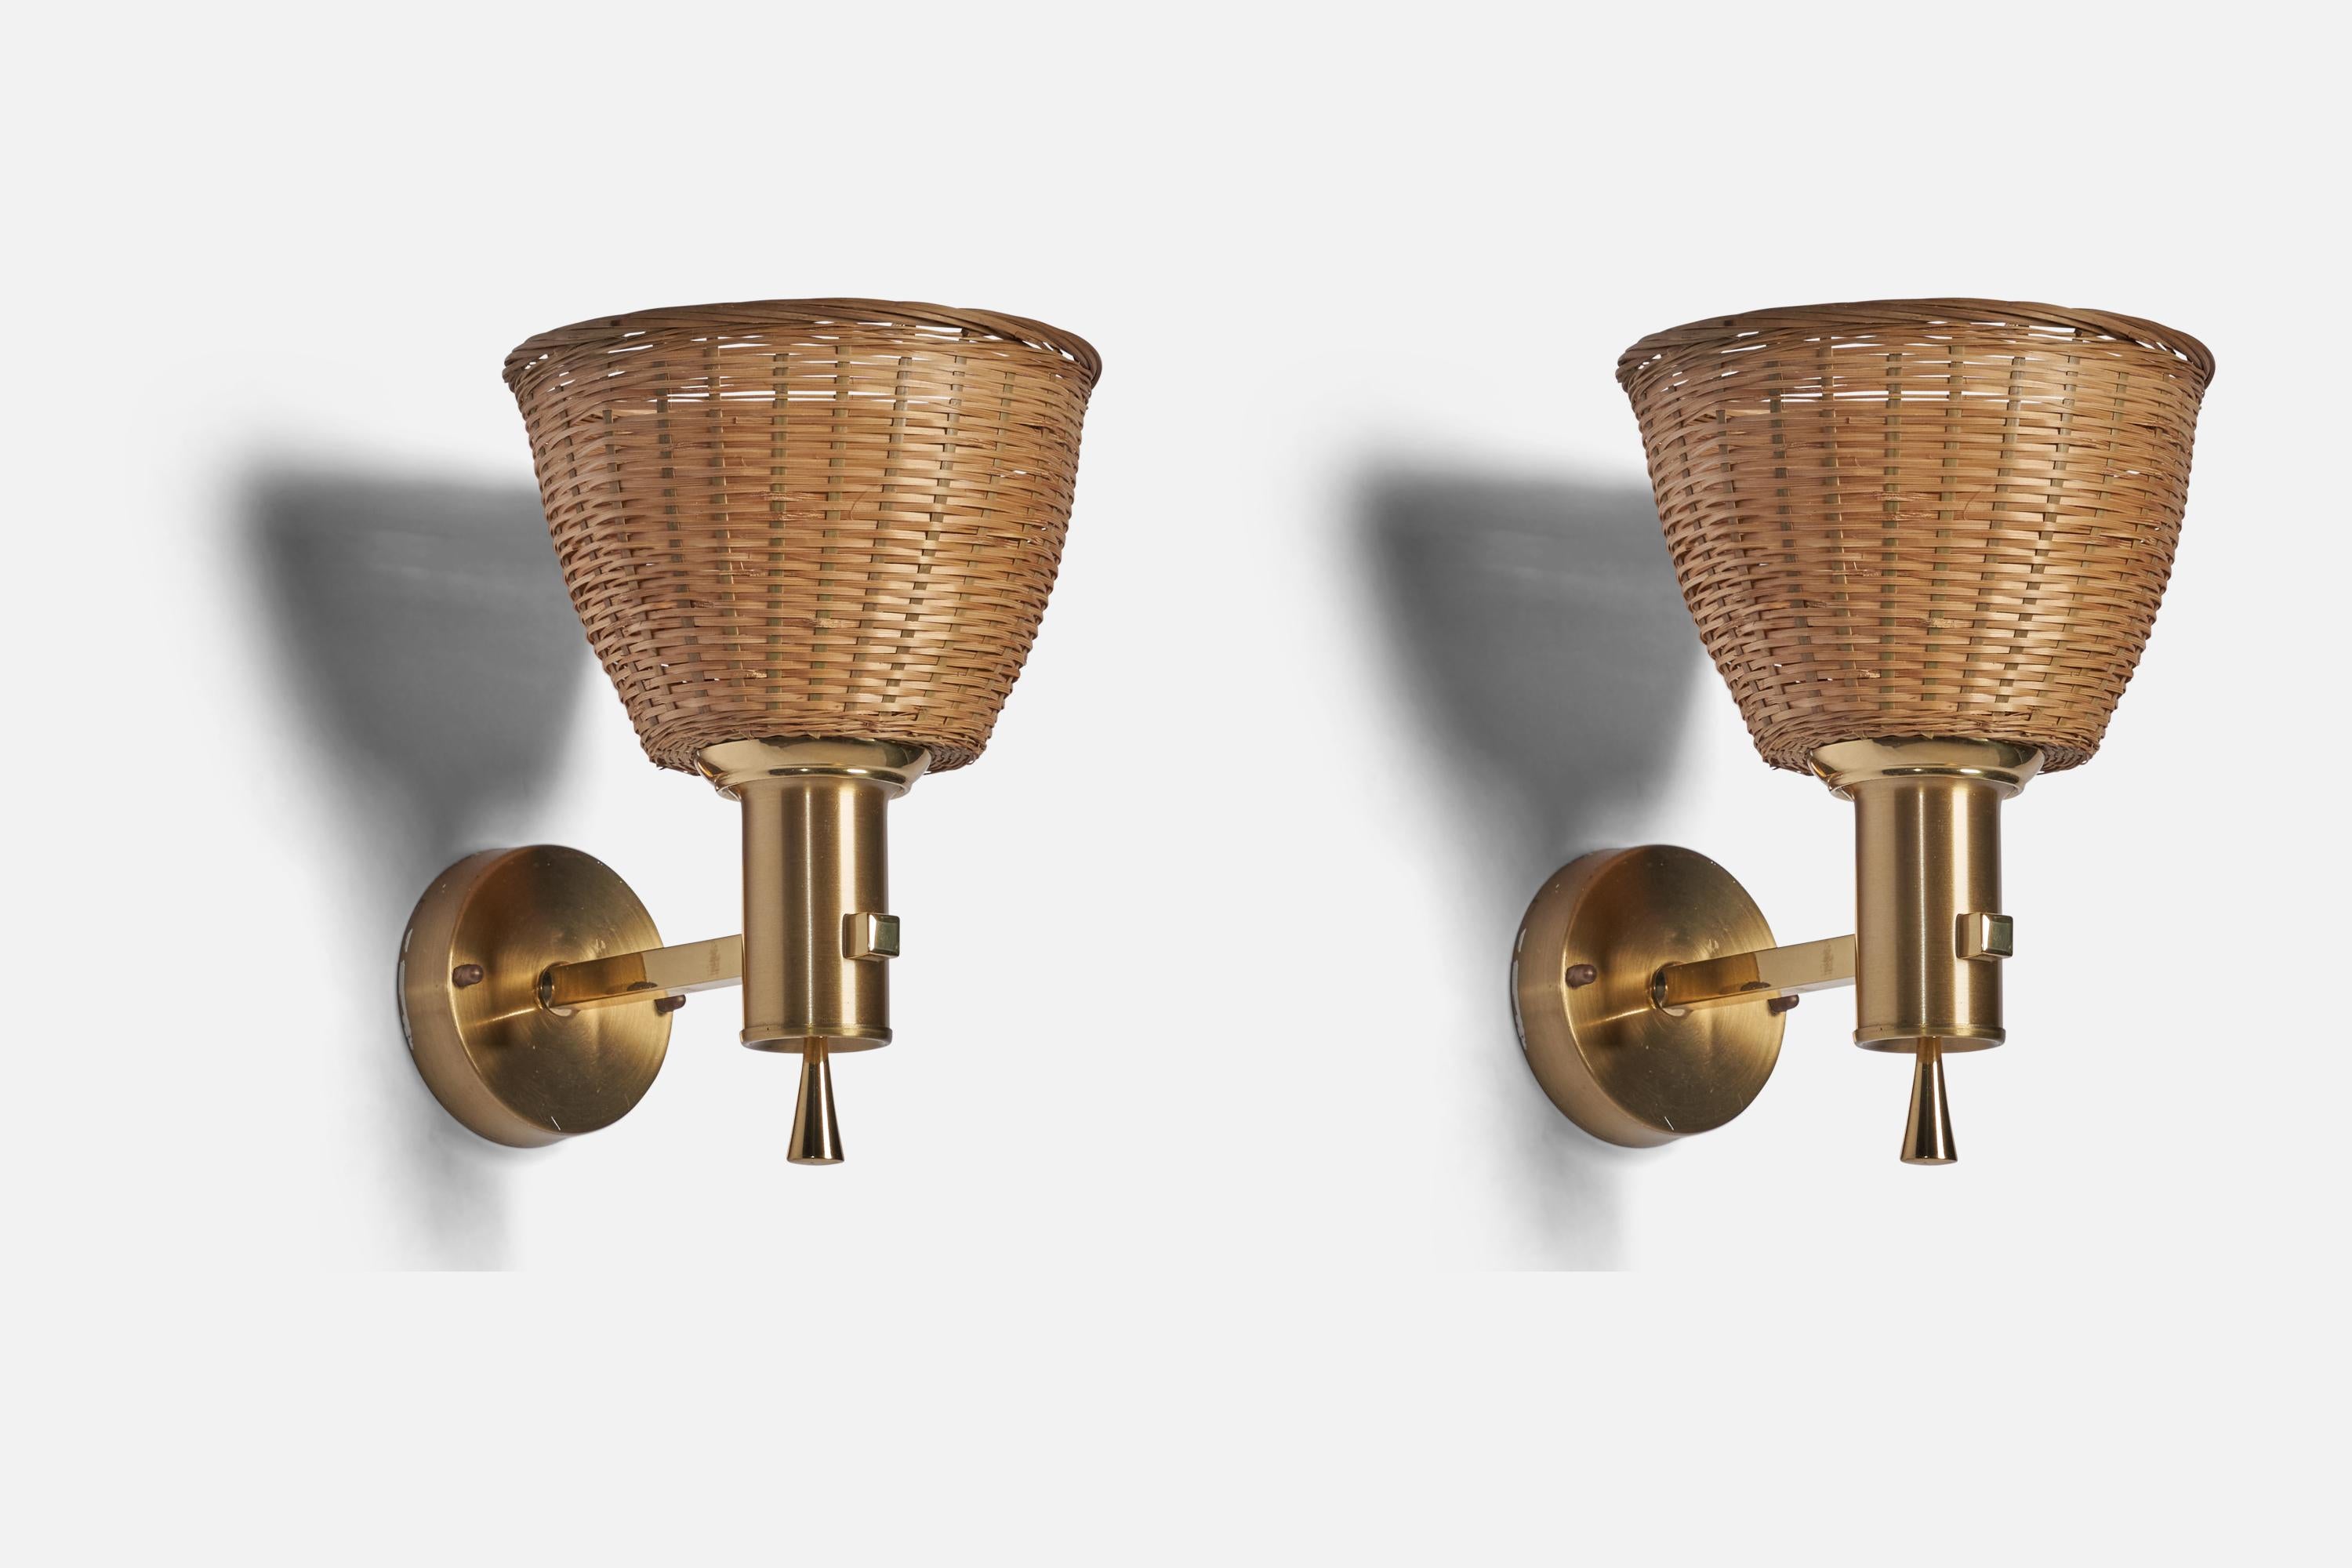 A pair of brass and rattan wall lights designed and produced by Ewå Värnamo, Sweden, c. 1960s.

Overall Dimensions (inches): 9” H x 6.75” W x 9” D
Back Plate Dimensions (inches): 3.5” Diameter
Bulb Specifications: E-26 Bulb
Number of Sockets: 1
All